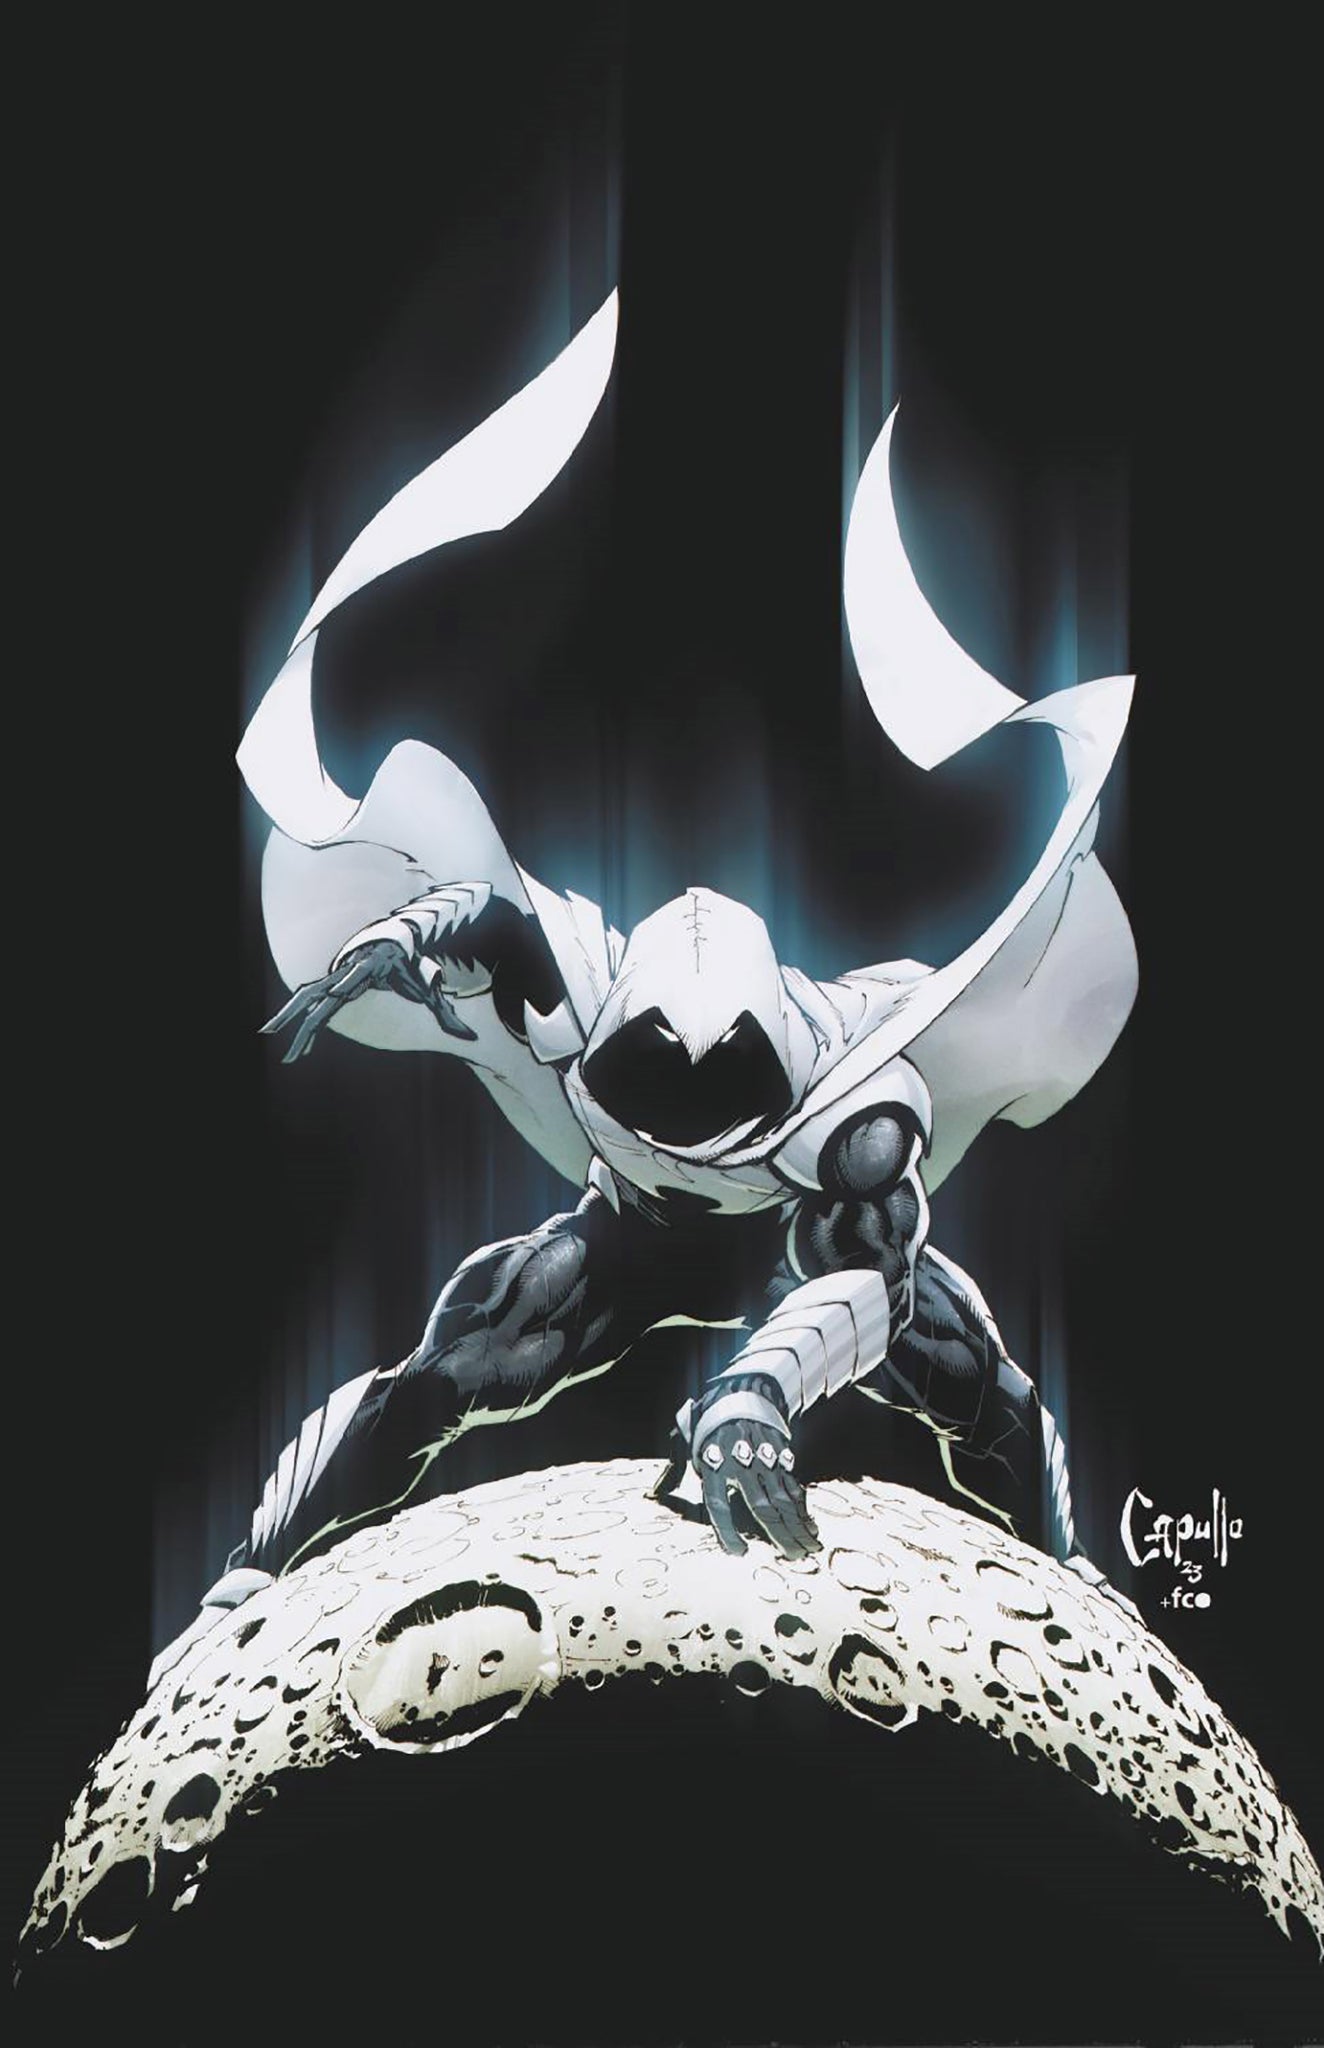 100+] Moon Knight Phone Backgrounds